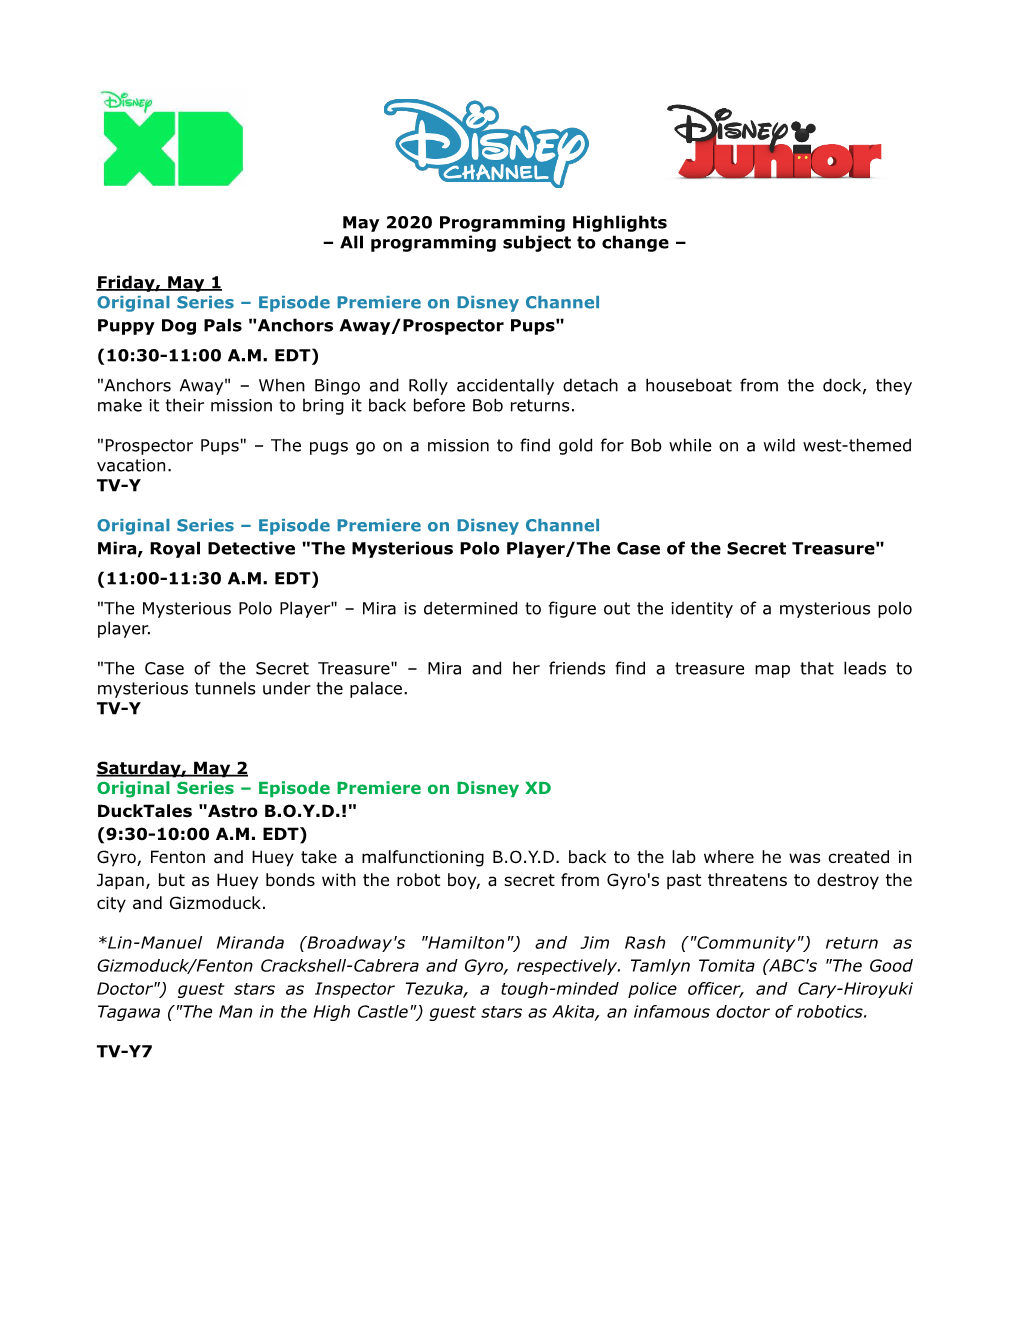 DC DXD DJ May 2020 Programming Highlights.Pages